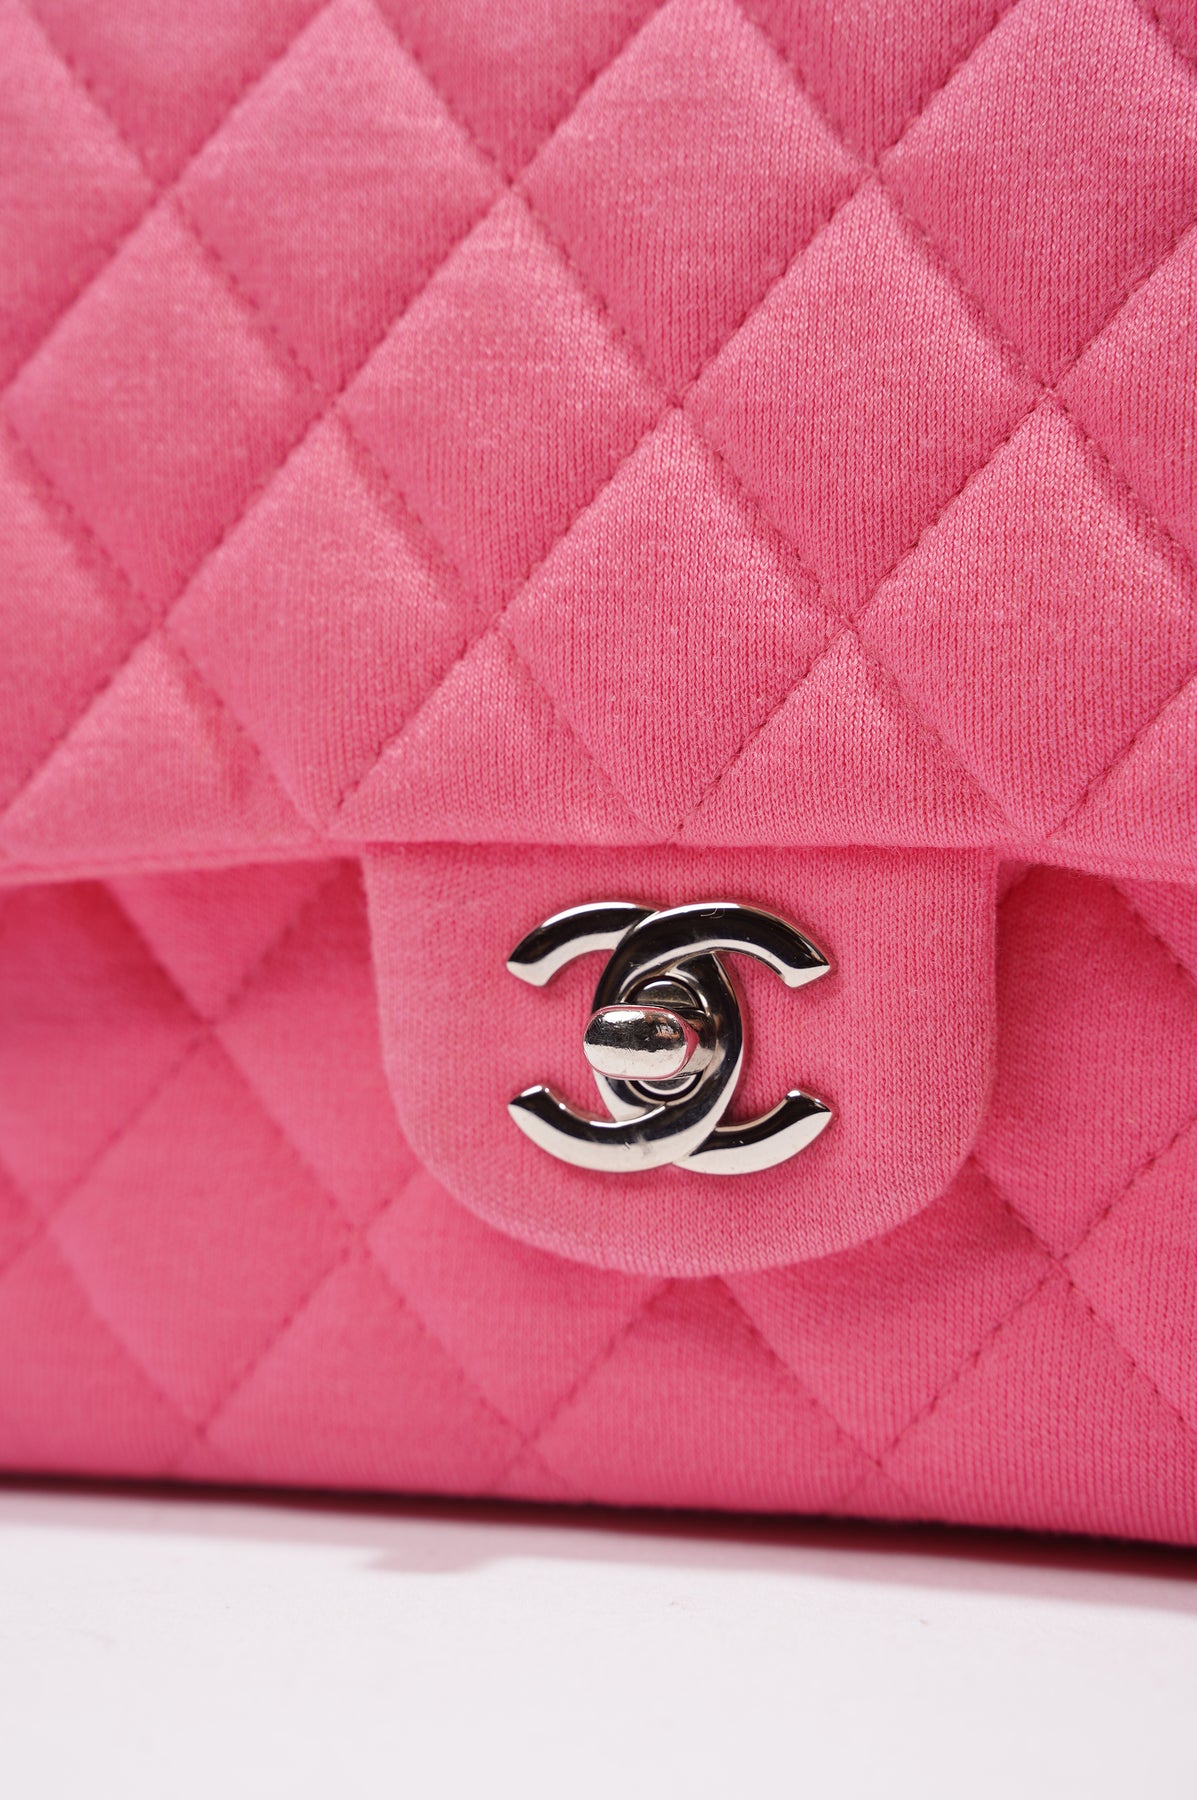 Chanel Womens Fabric Double Flap Bag Pink Medium – Luxe Collective